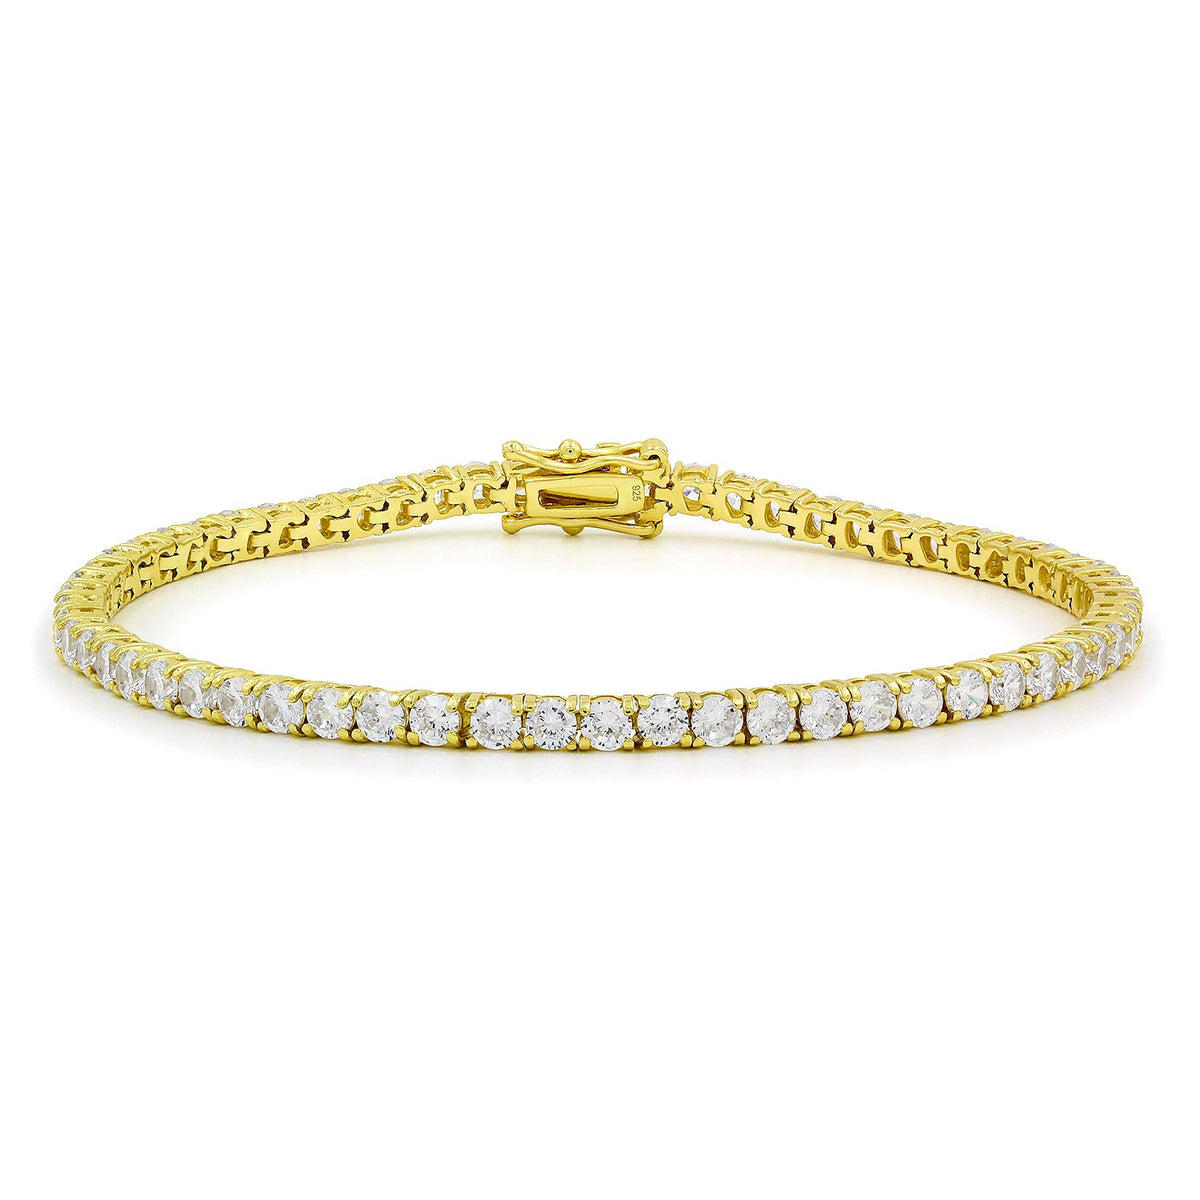 925 Sterling Silver 3mm Round Cut Tennis Bracelet, Yellow Gold Plated